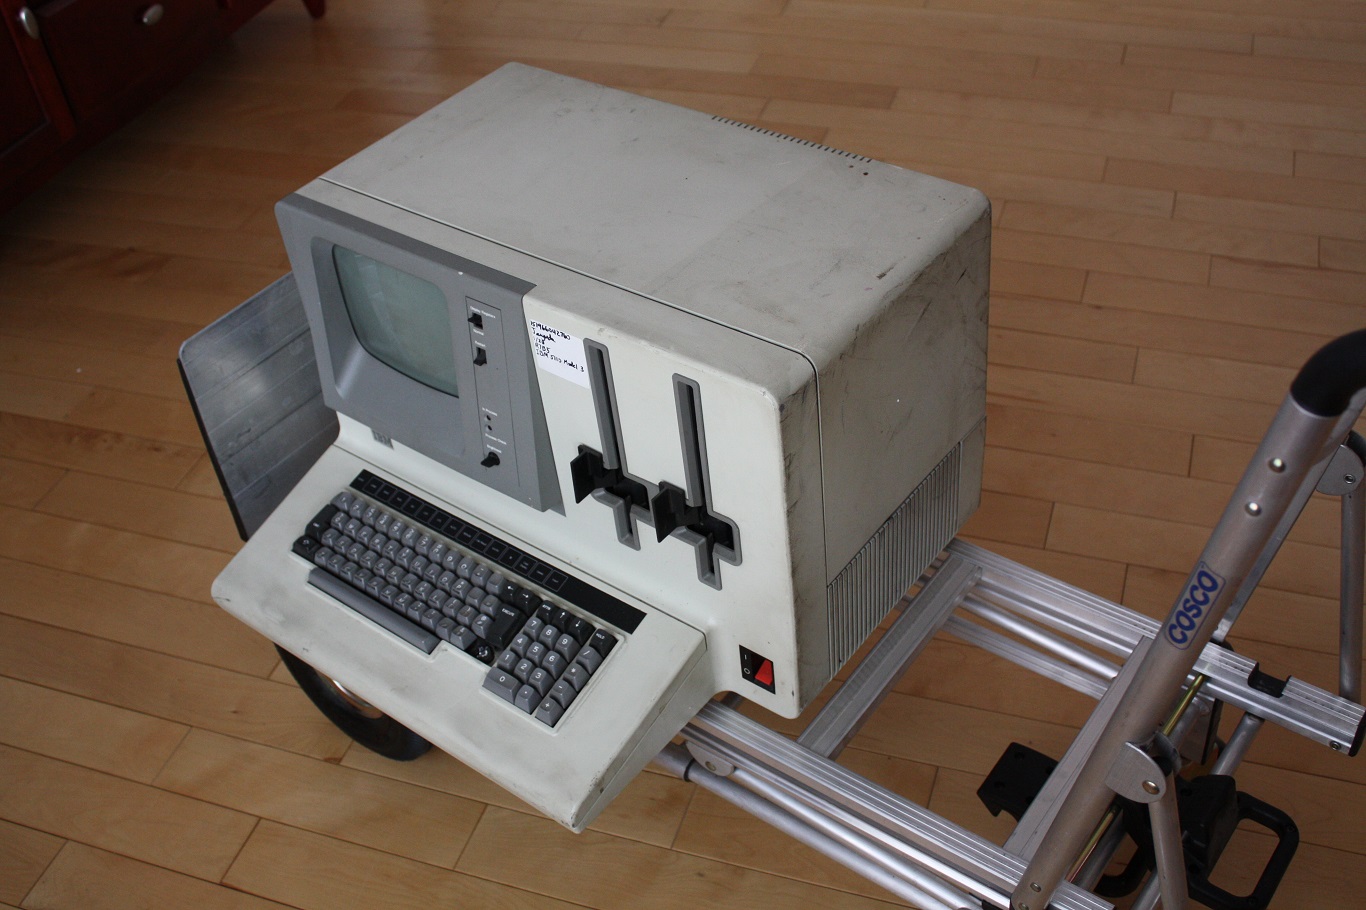 IBM 5120 - newly arrived and dirty